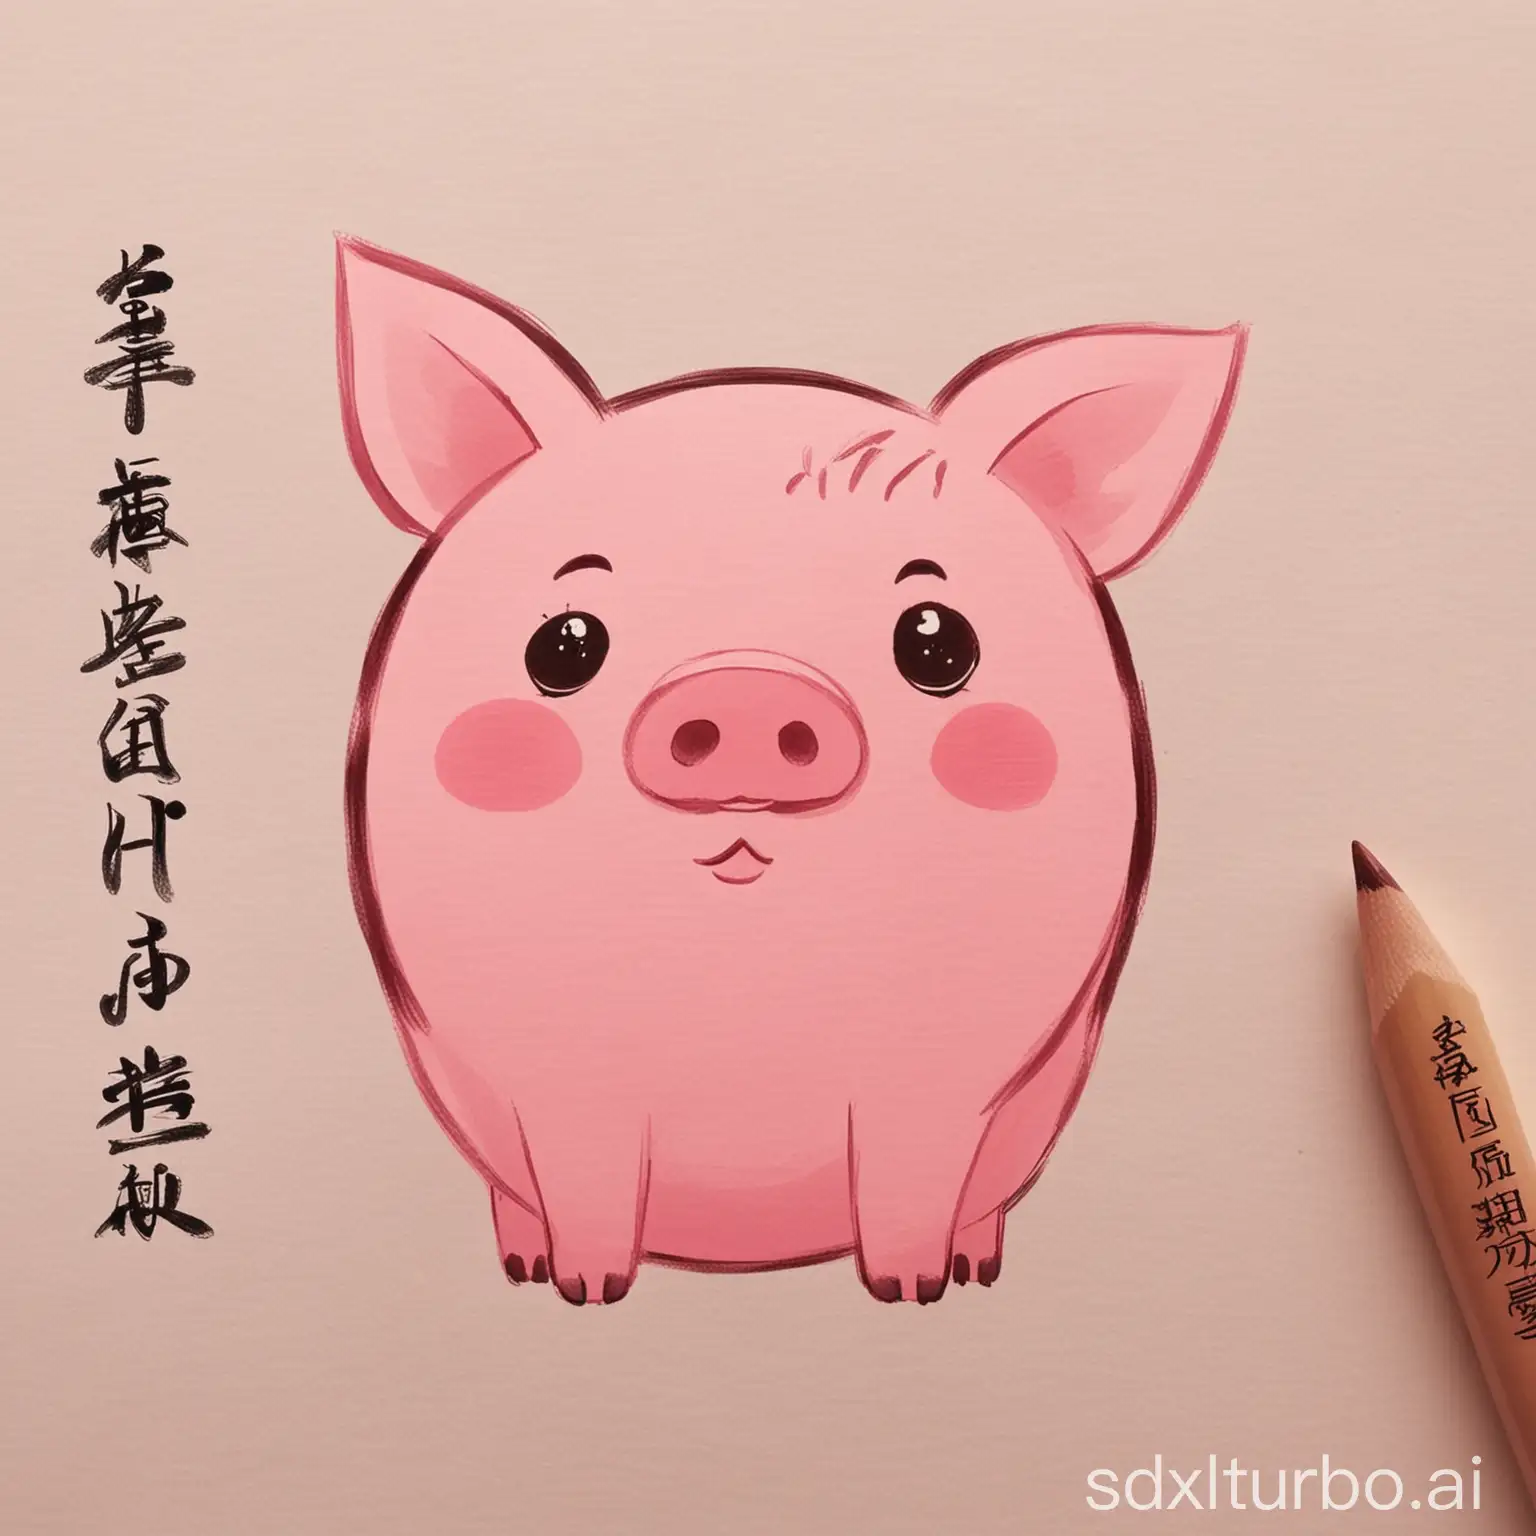 Cute-Pink-Pig-with-Characters-Playful-Animal-Art